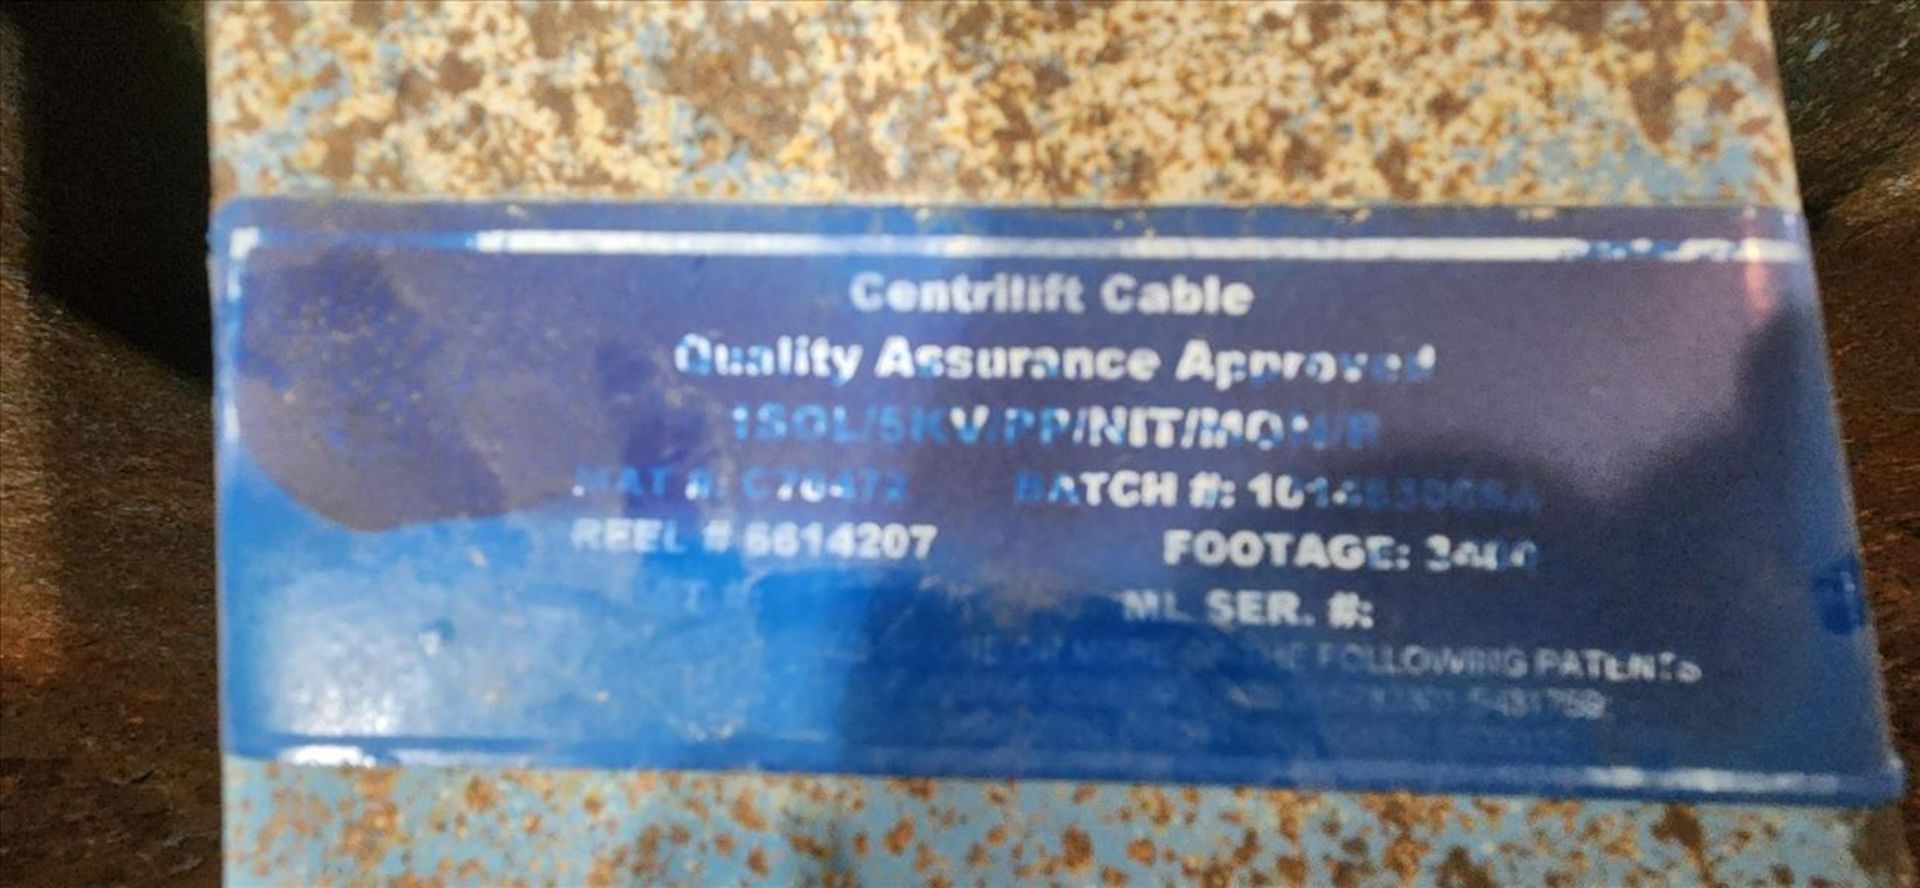 reel of cenrilift cable, 150L/5KV/PP/NIT/MON/R, MAT C70472, 2400 ft. (Subject to confirmation. The - Image 2 of 2